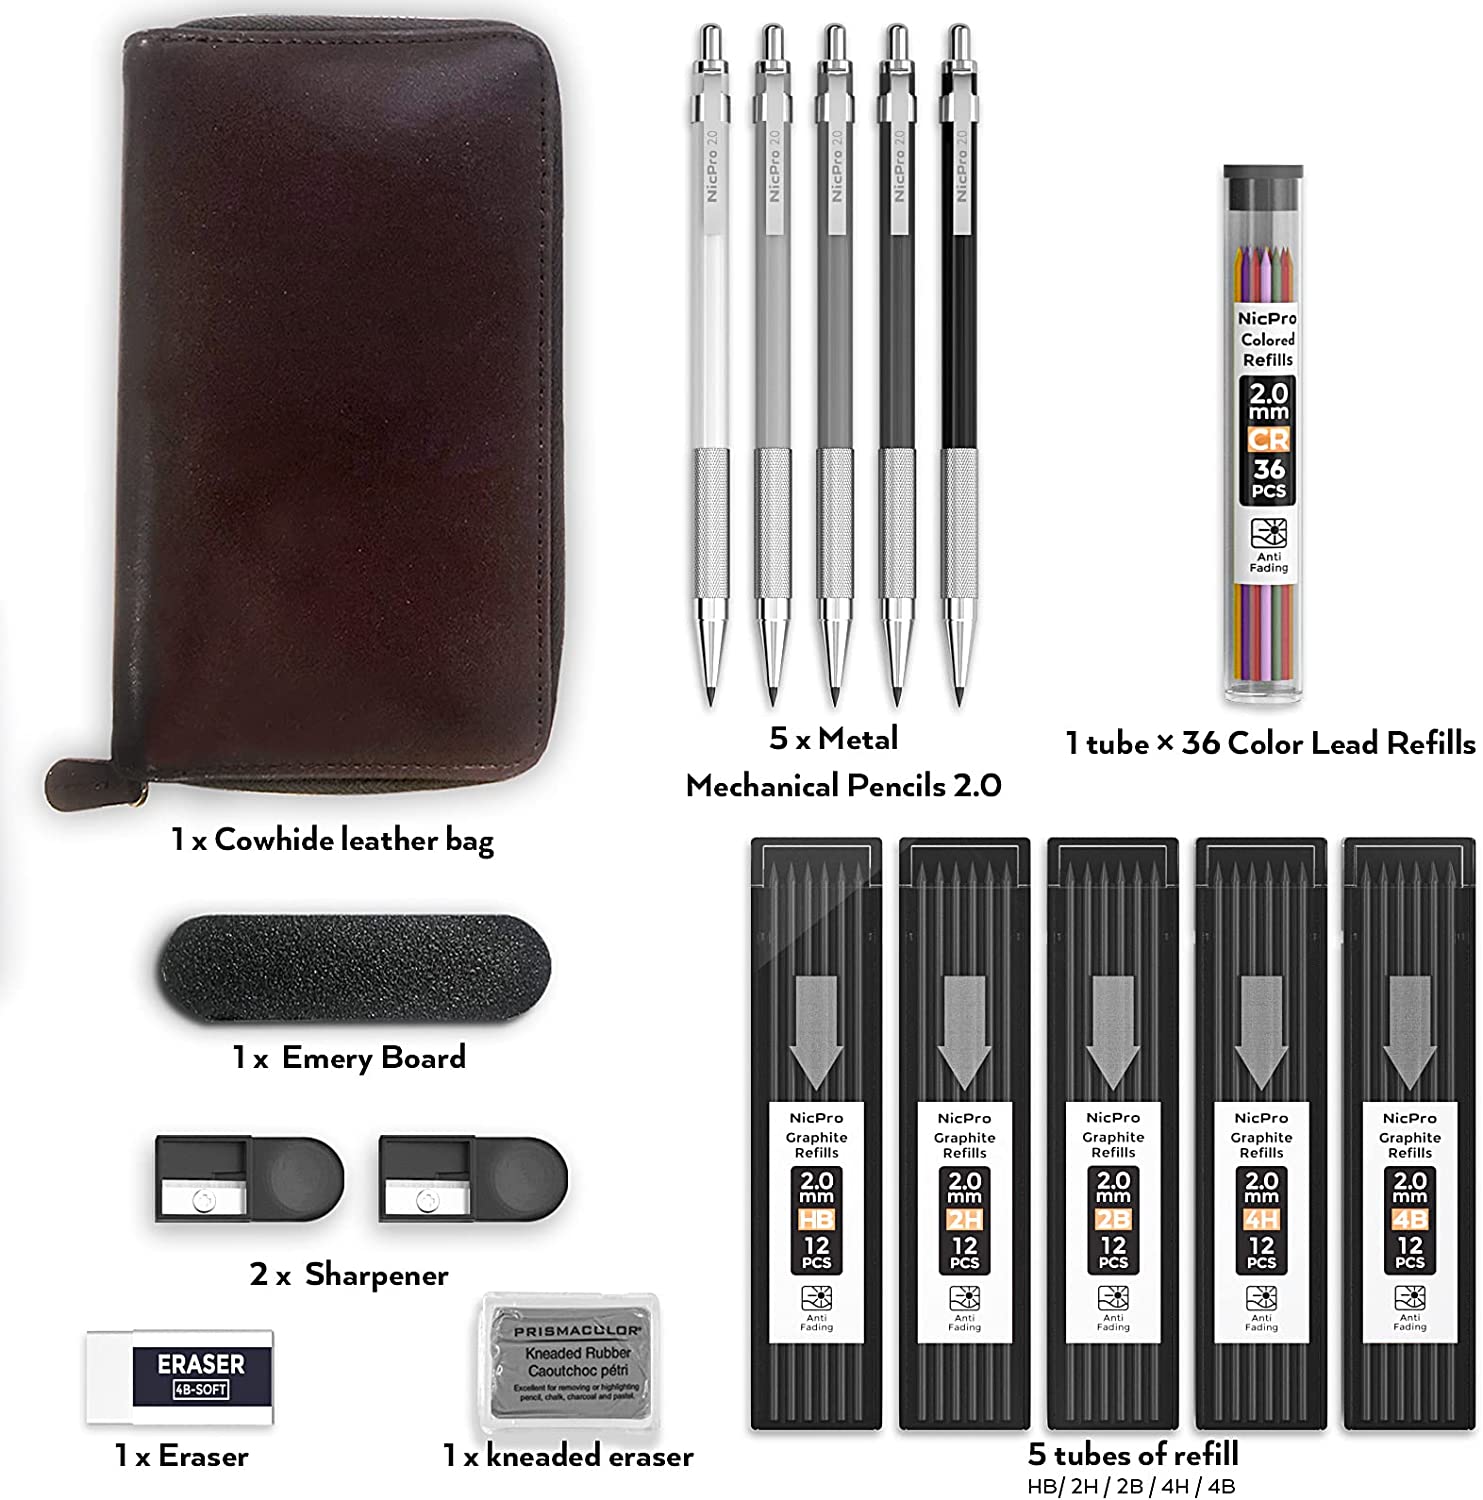 Nicpro 17PCS Metal 2mm Mechanical Pencil Set in Leather Case, 2.0 mm Lead Pencil Holders (4B 2B HB 2H 4H) 6 Tube Black Lead Refills & Colored Lead, Erasers,Sharpener For Art Drafting Sketching Drawing